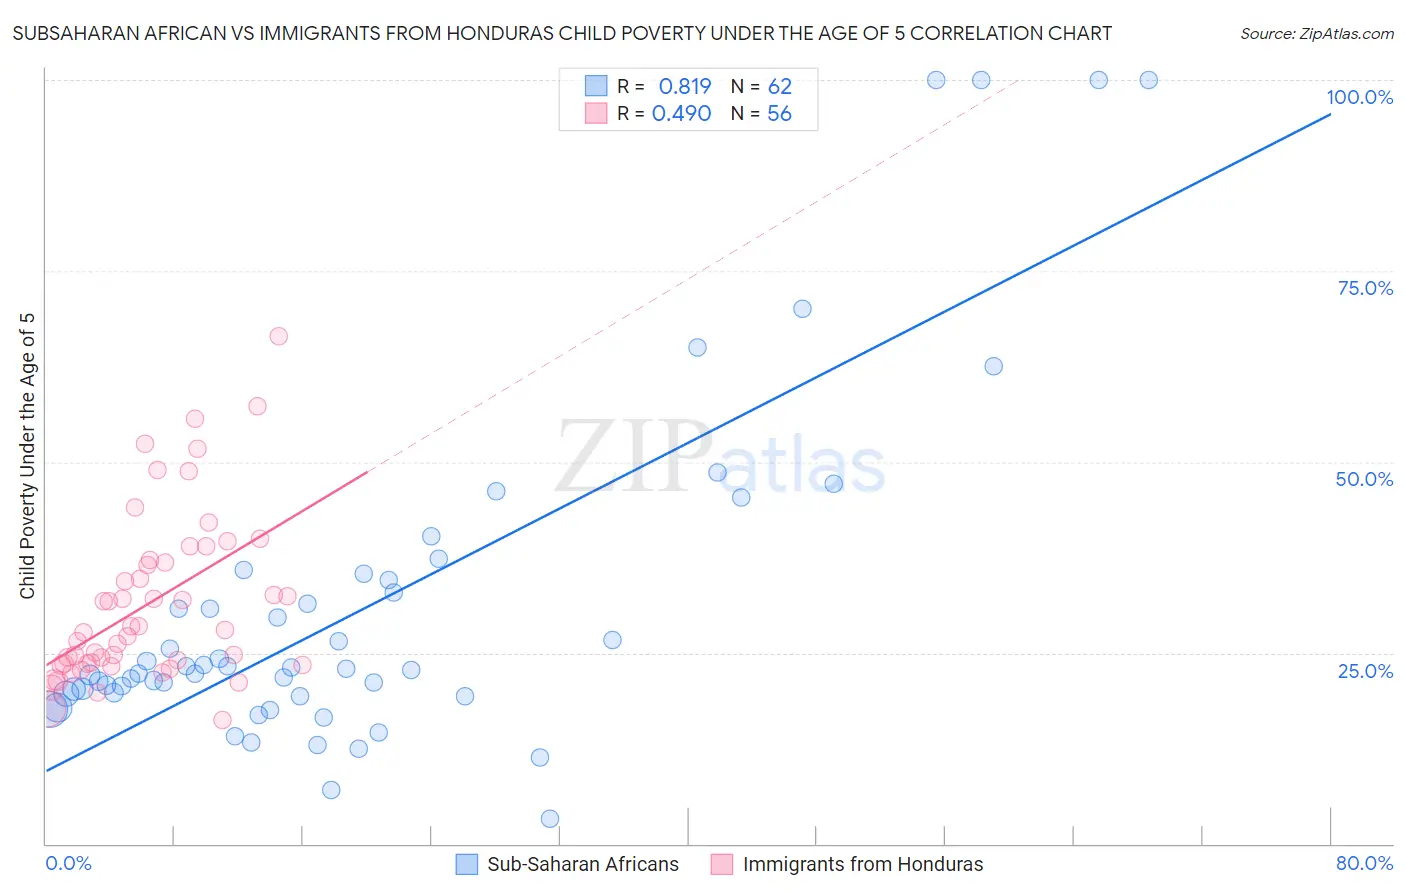 Subsaharan African vs Immigrants from Honduras Child Poverty Under the Age of 5